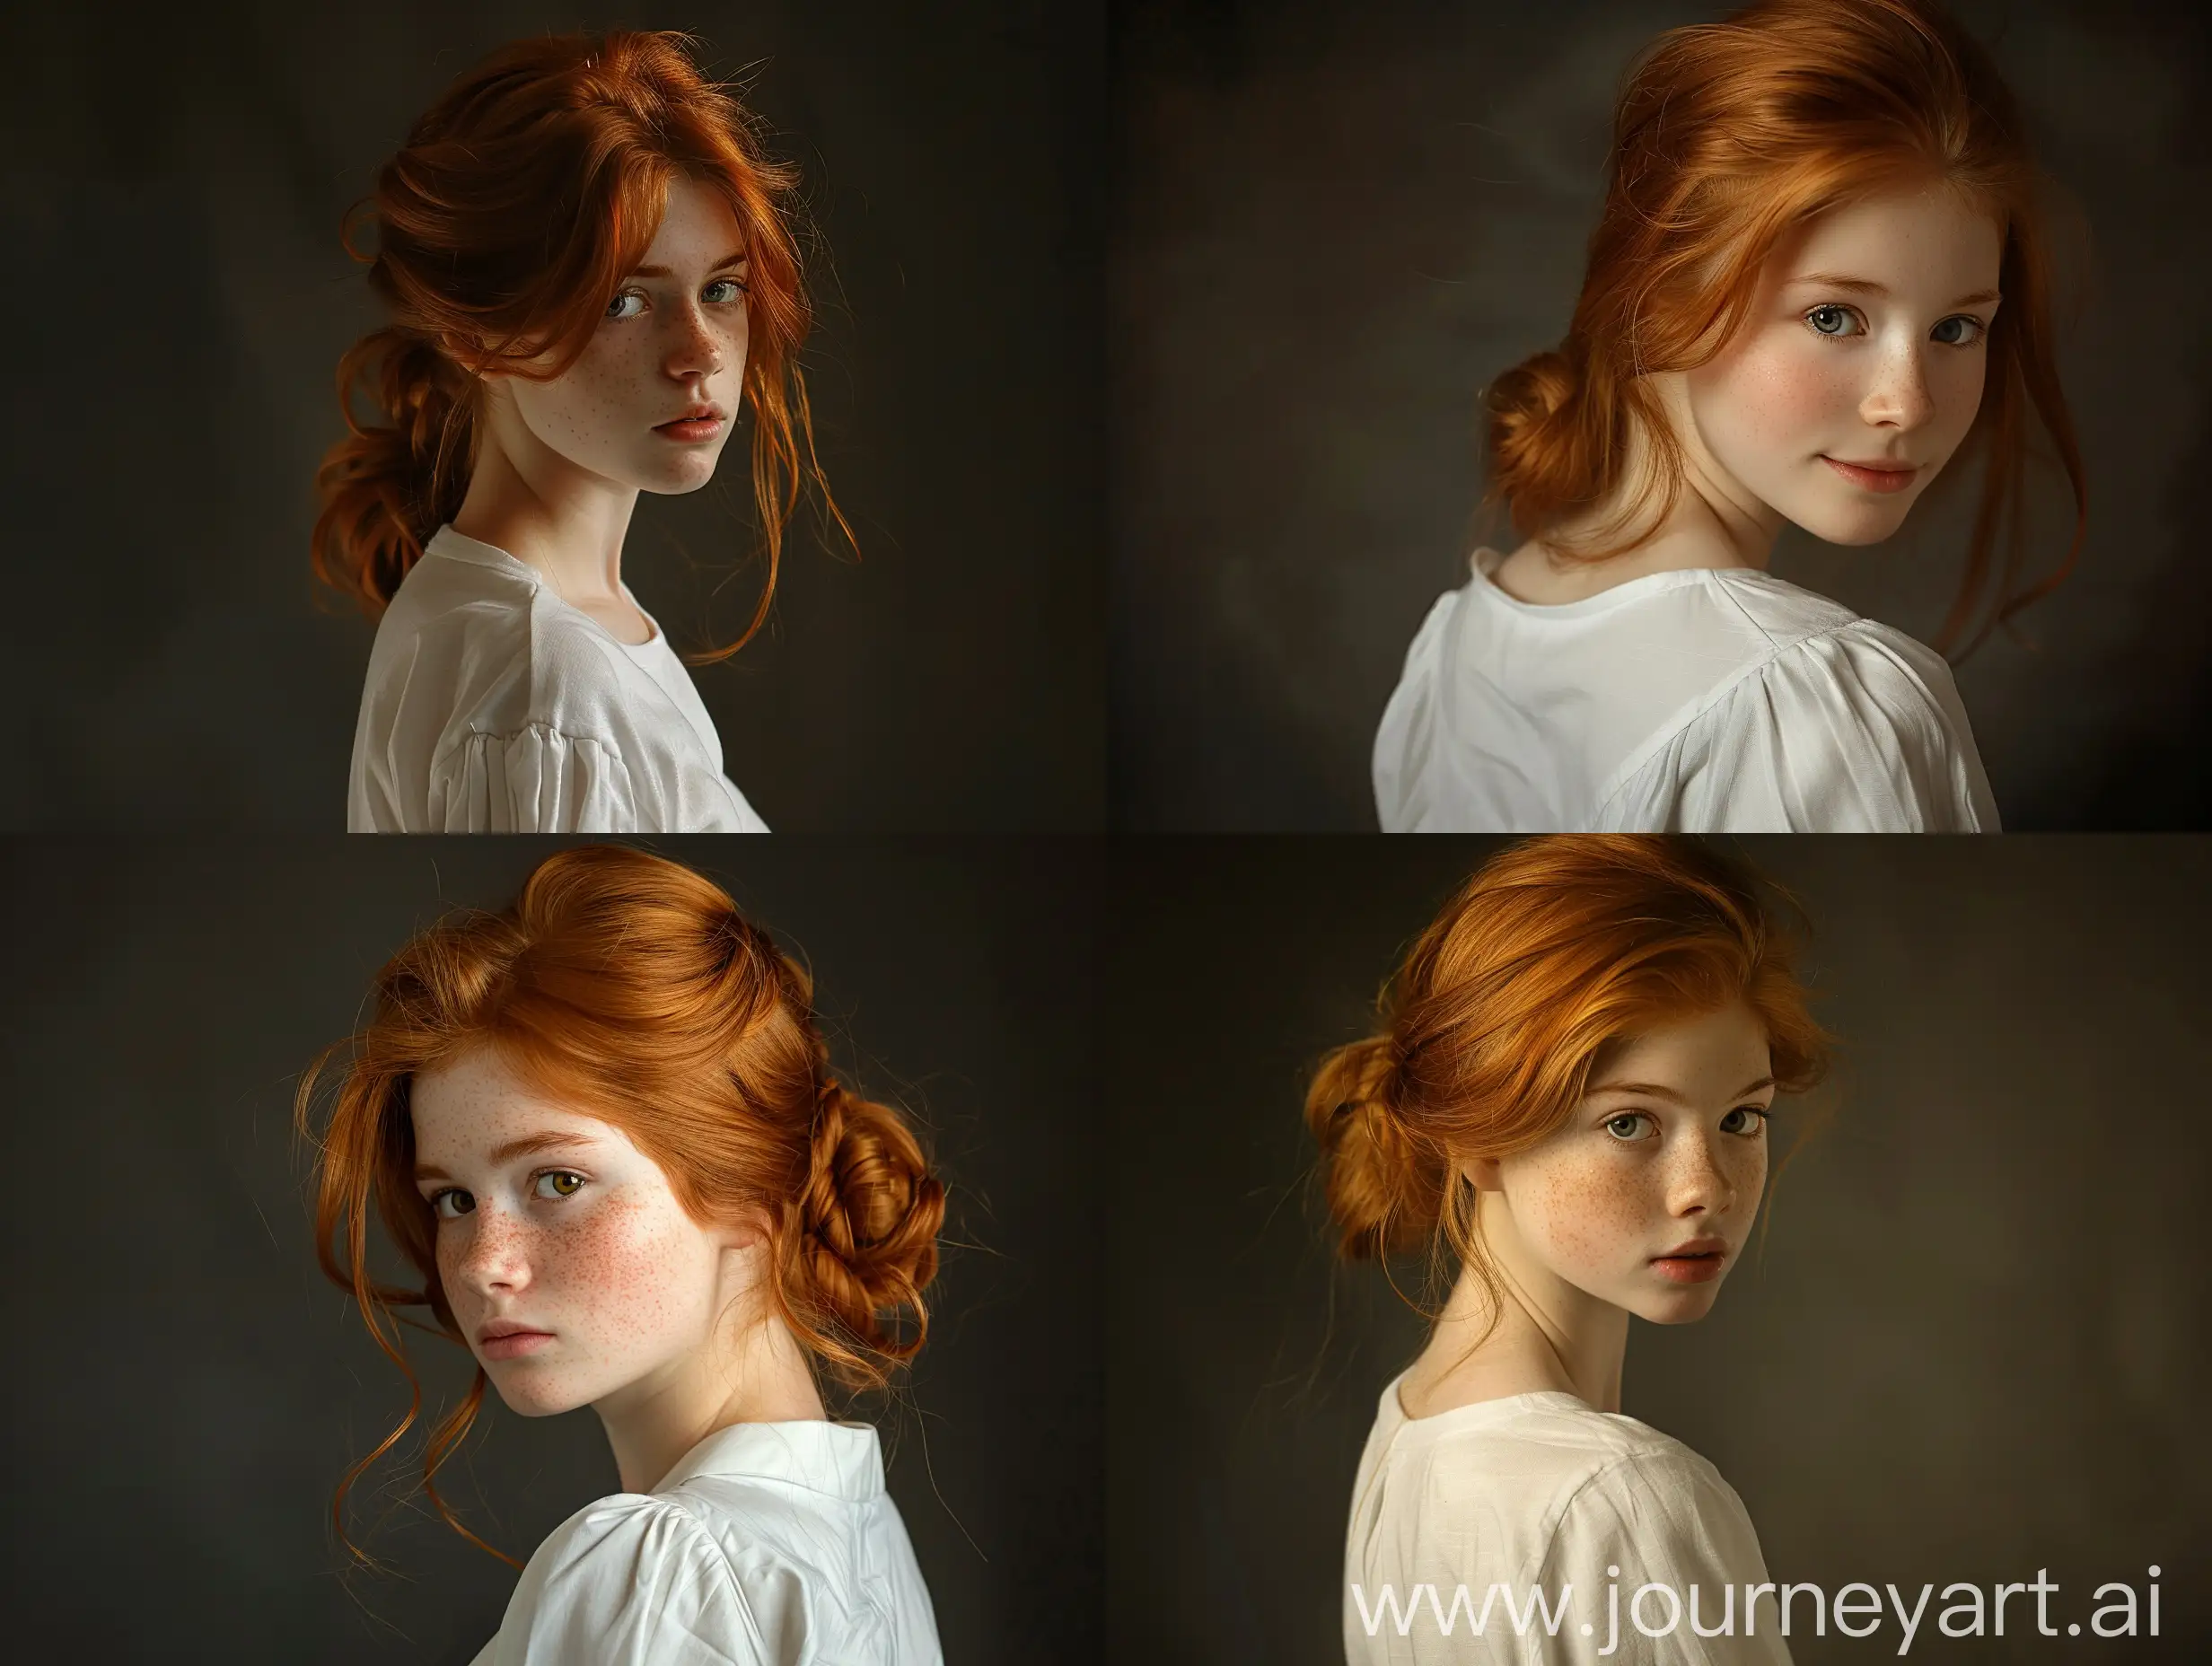 RedHaired-Woman-in-White-Shirt-with-Indifferent-Gaze-in-Soft-Studio-Lighting